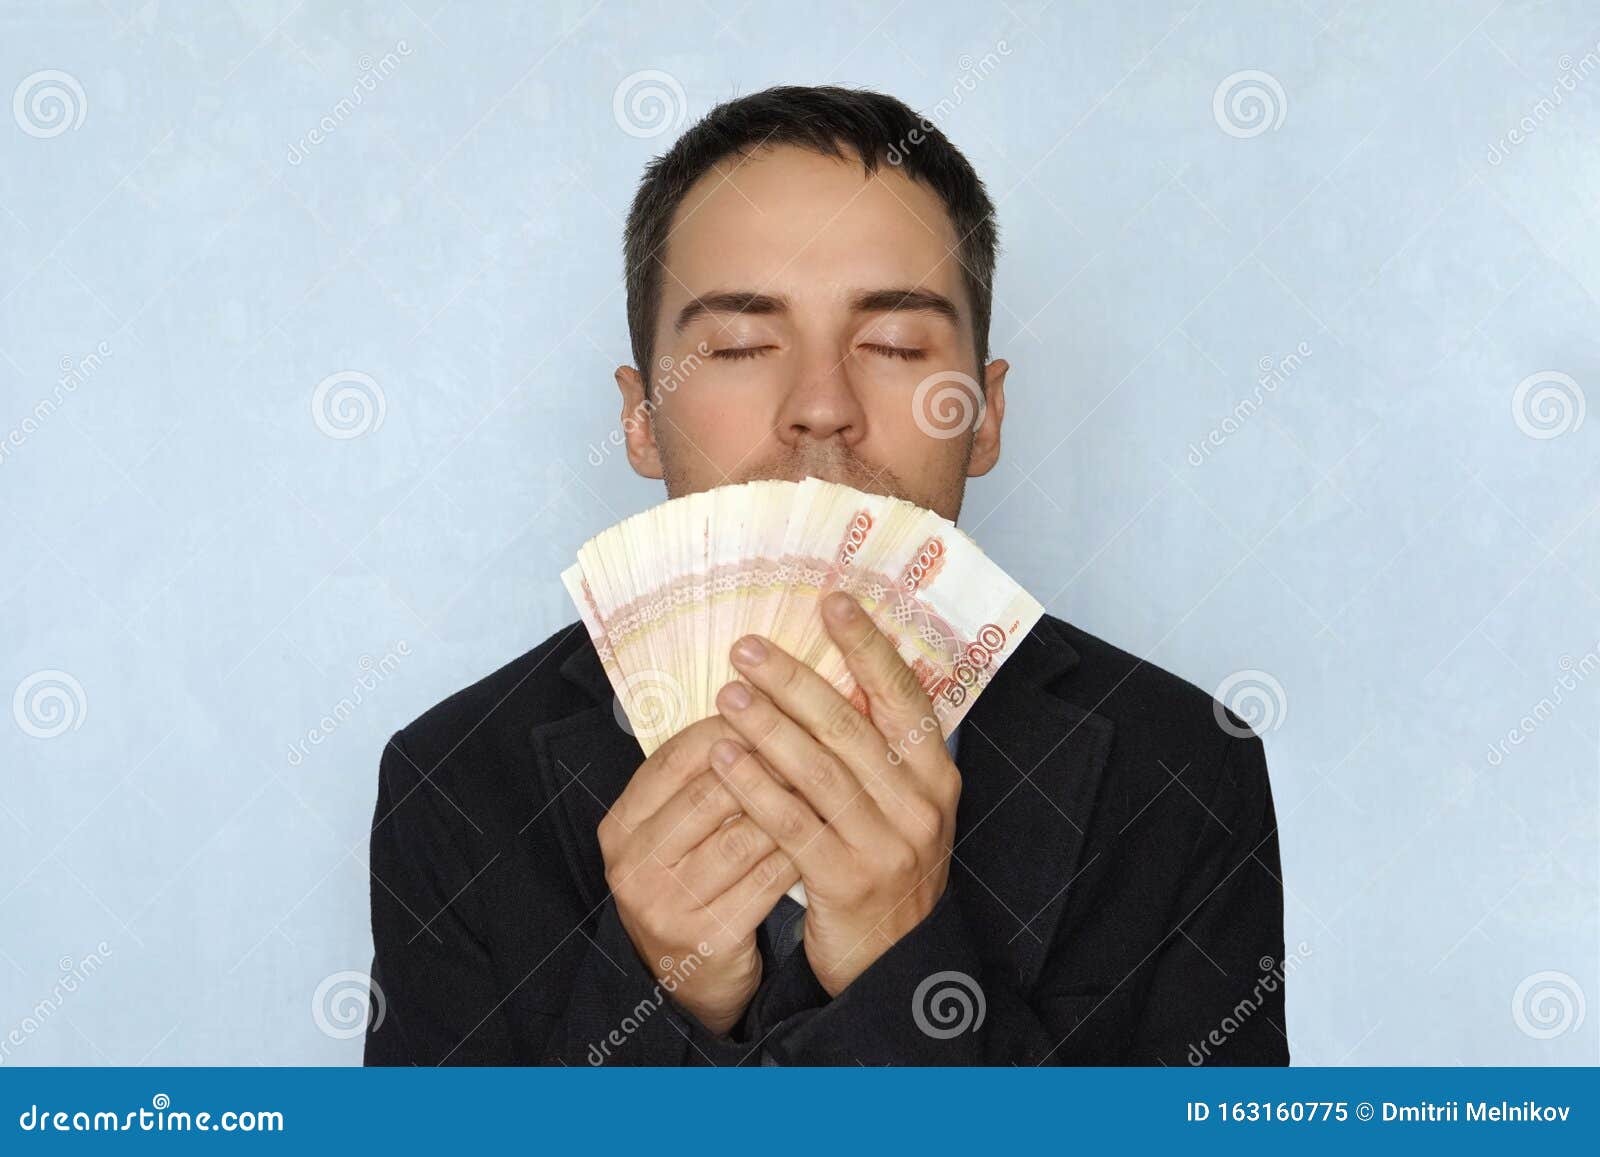 Business People And Finances Concept Businessman Smelling Russian Money The Sweet Smell Of